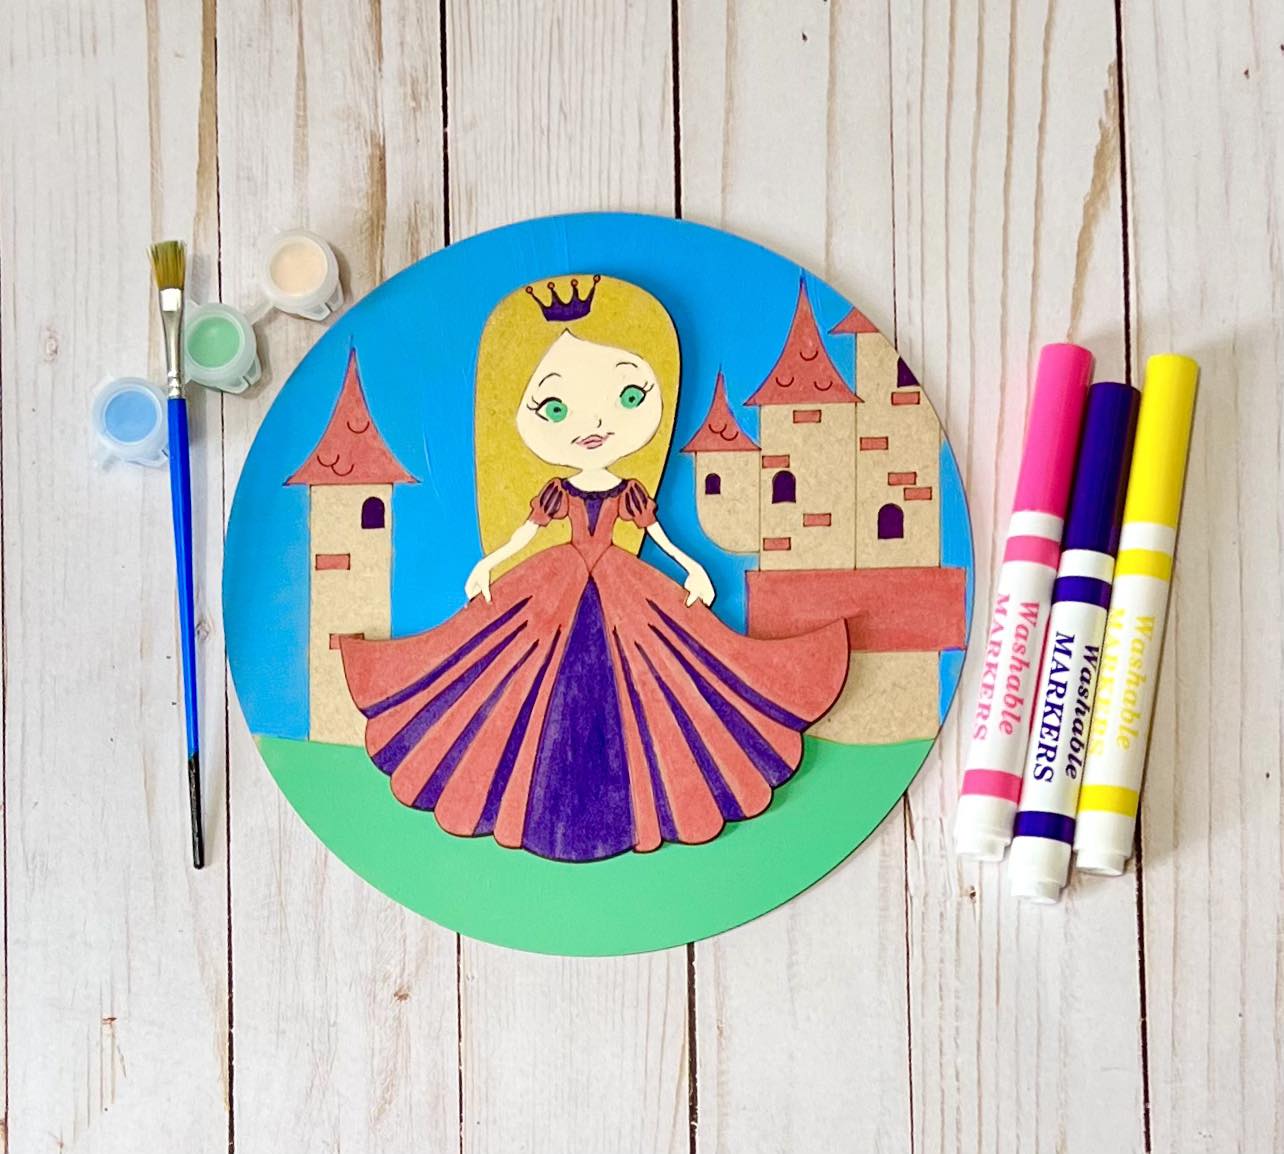 PRINCESS CASTLE - New Creations By Kid's Ready to Paint Kit